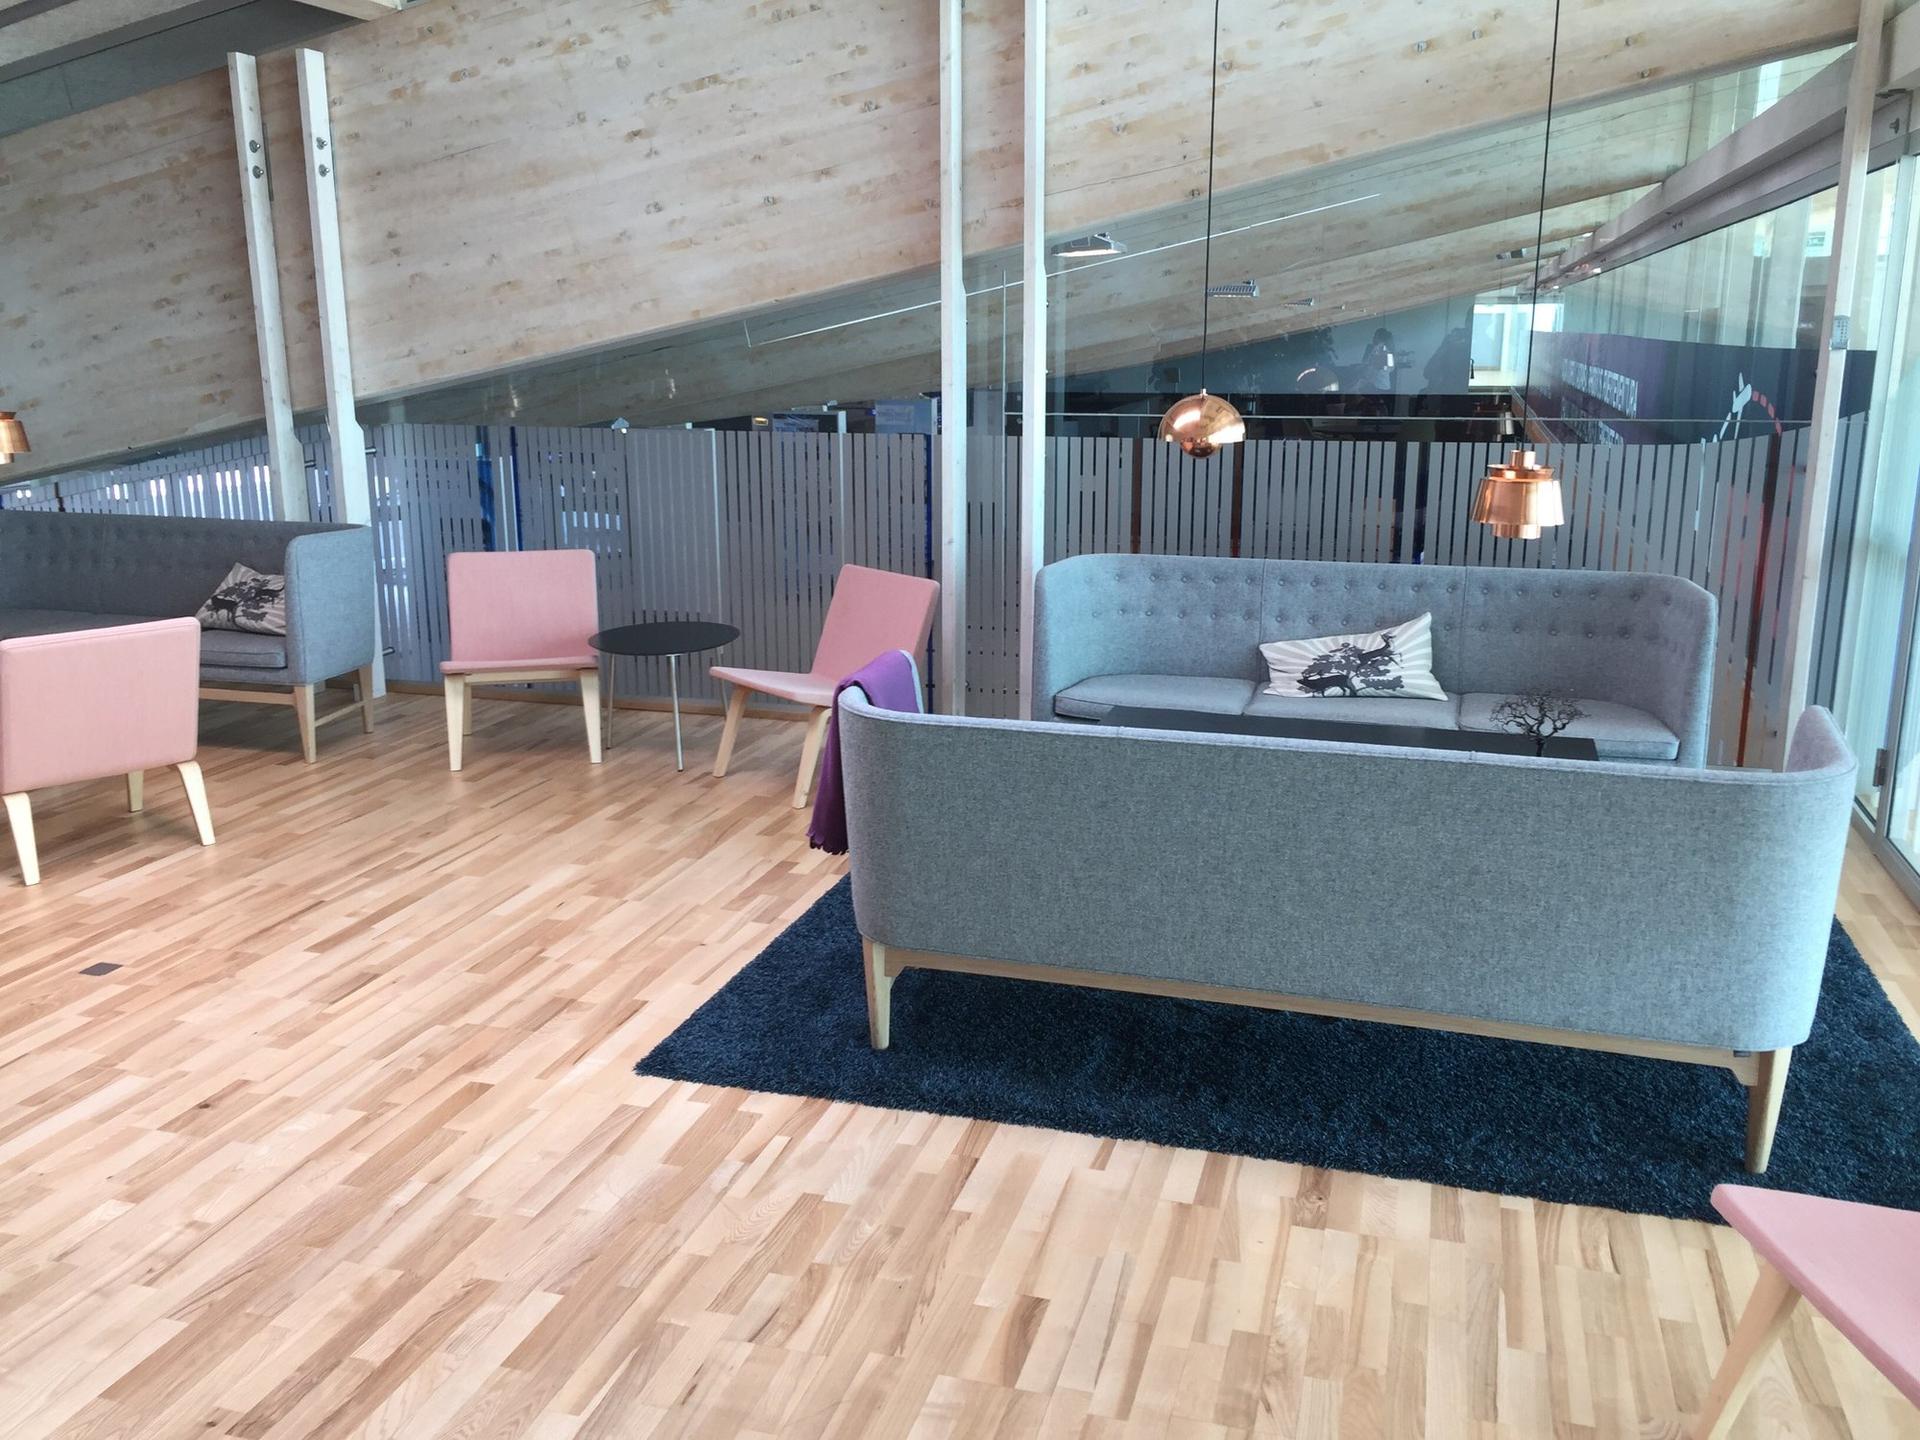 Aalborg Airport Lounge image 1 of 4